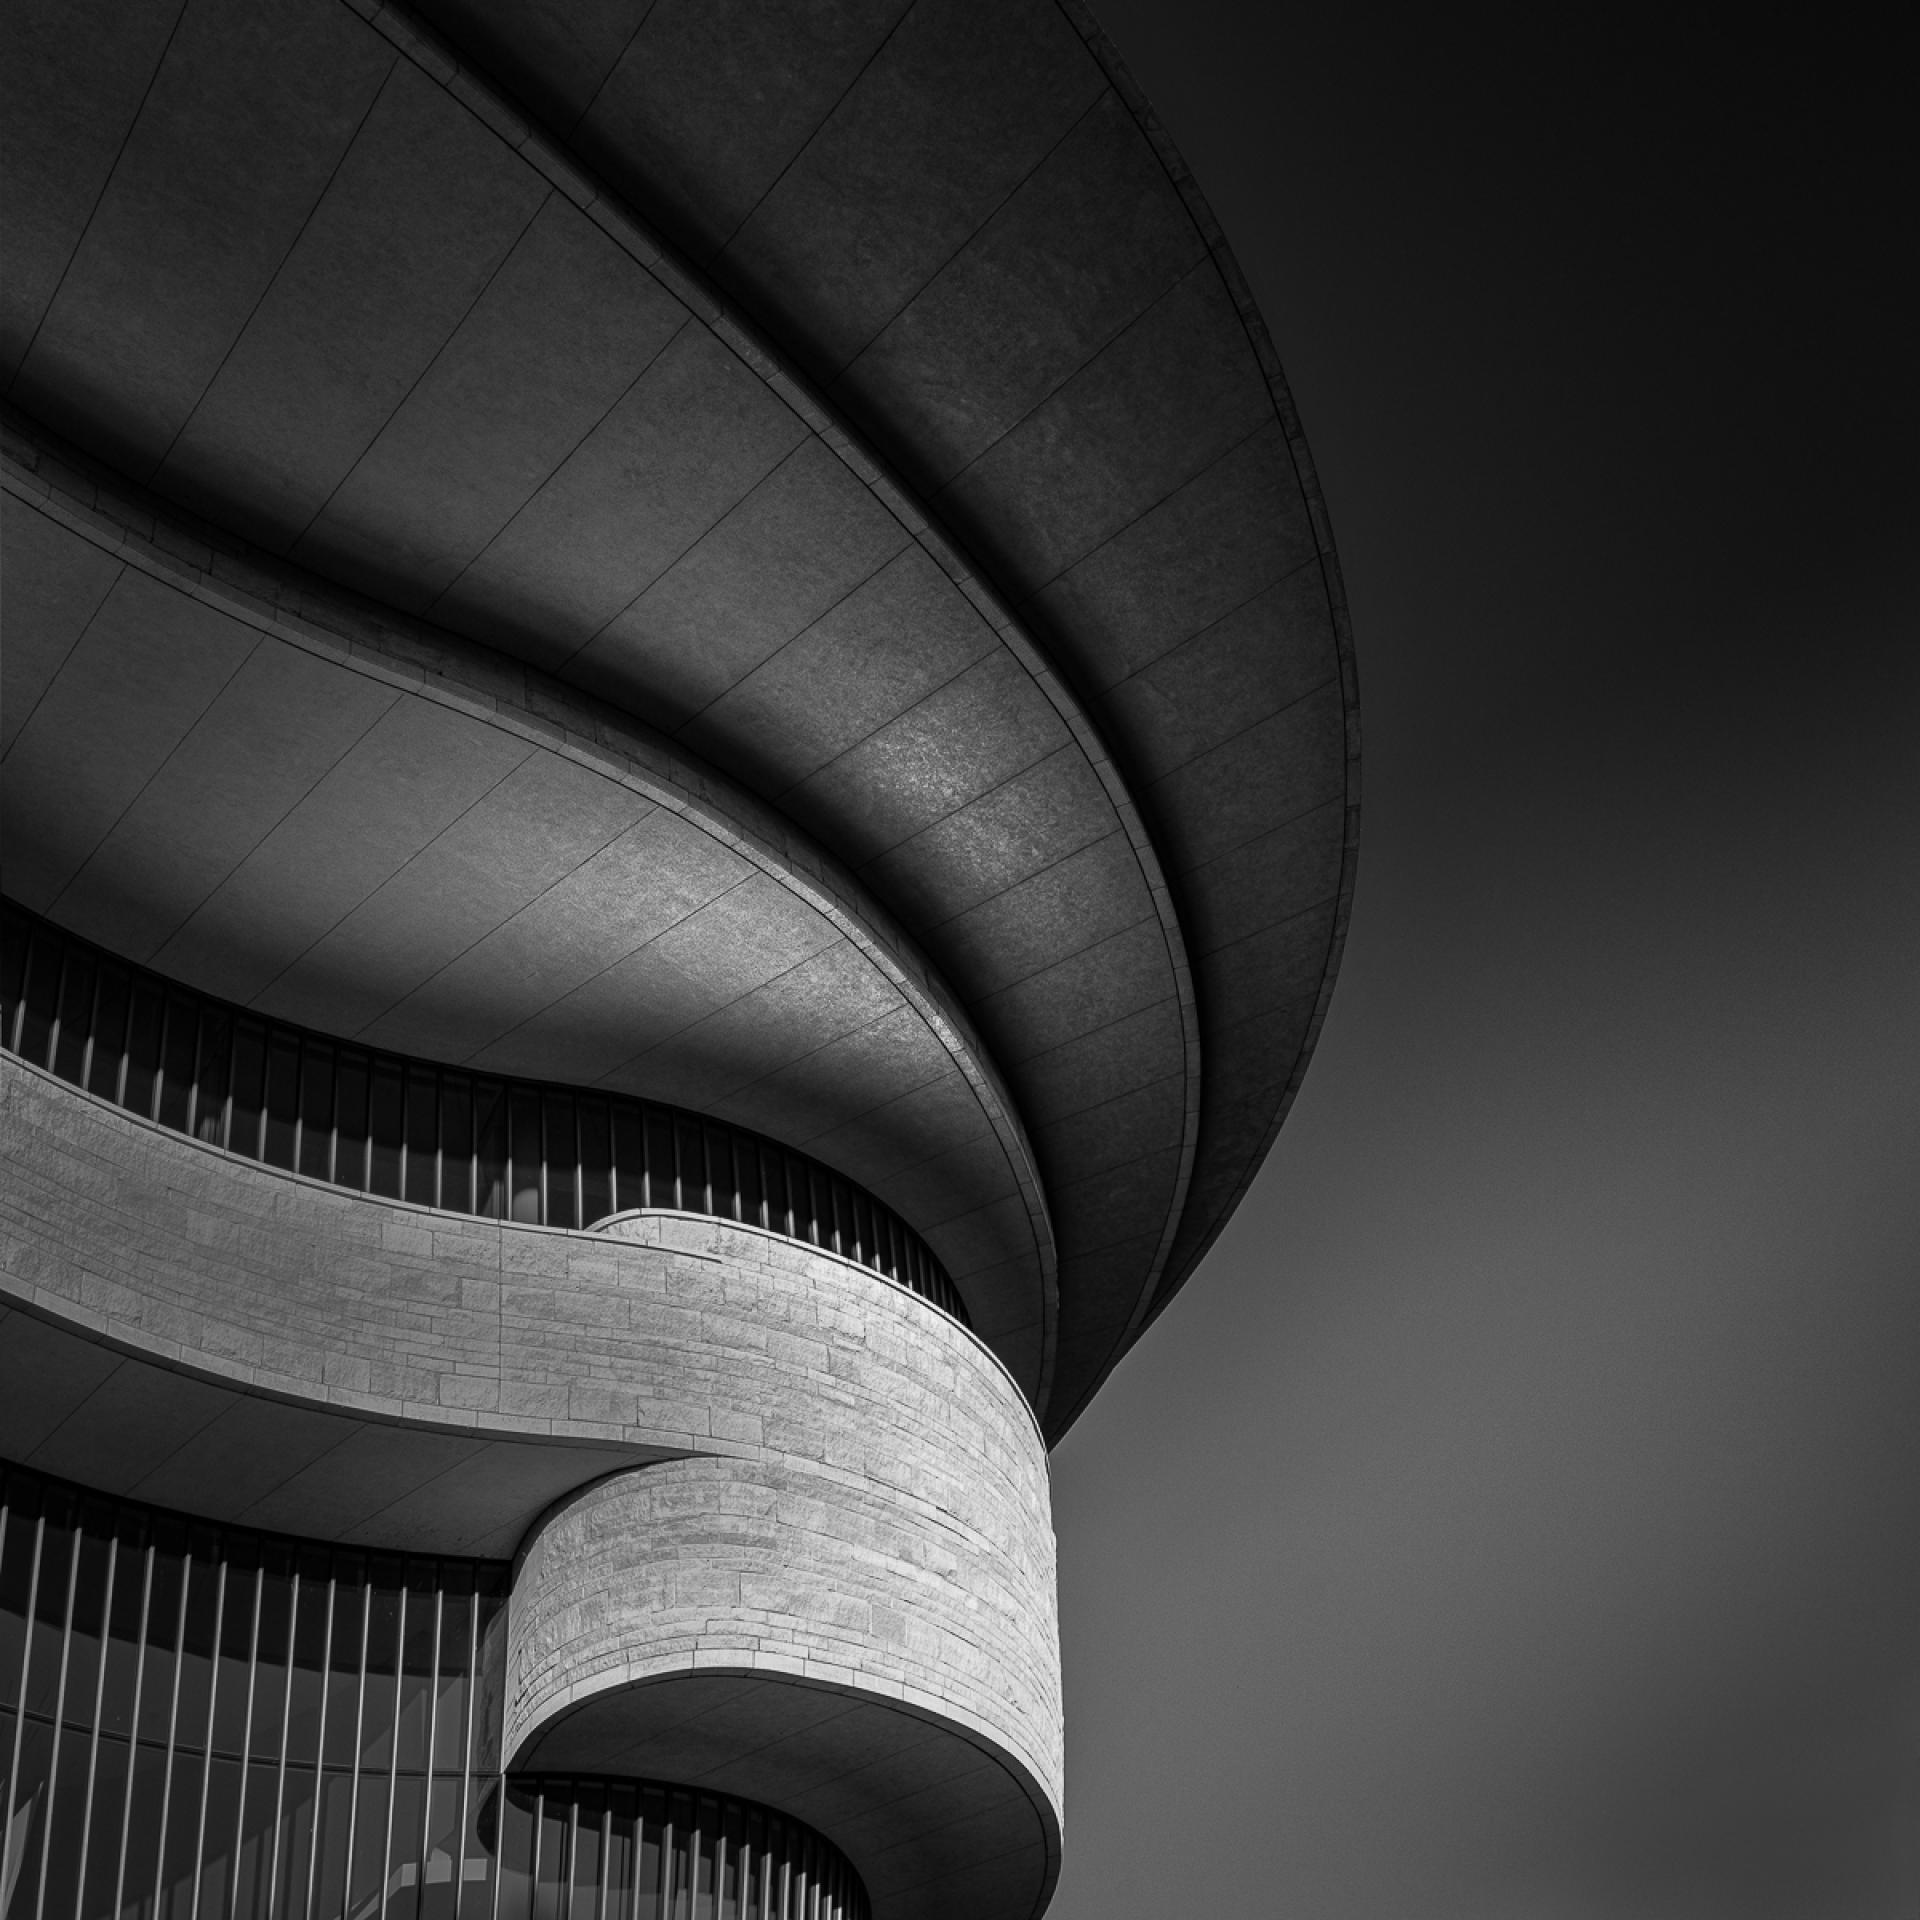 London Photography Awards Winner - GEOTECTURE